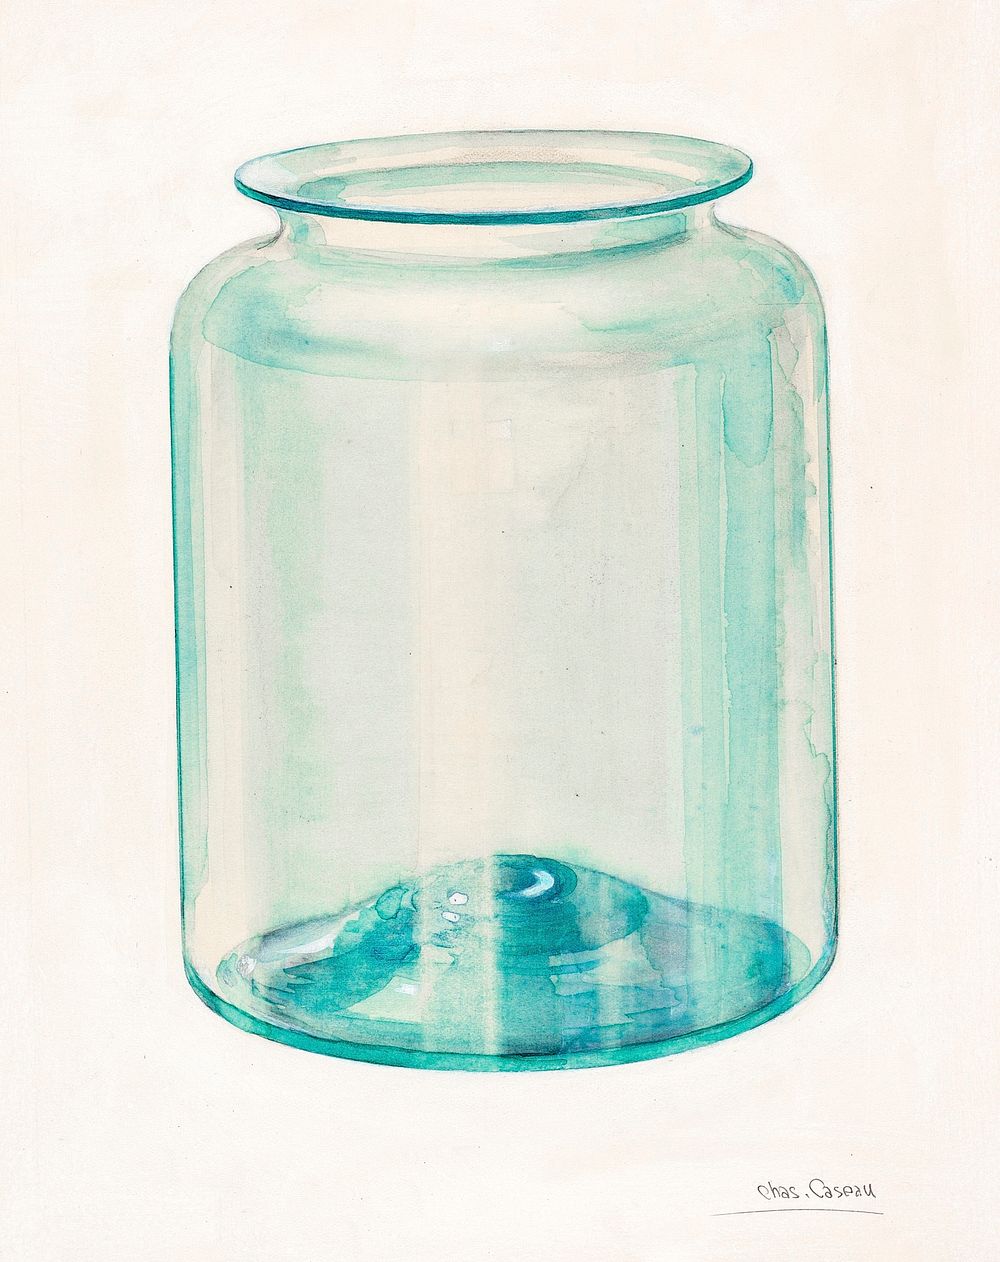 Jar (ca. 1936) by Charles Caseau. Original from The National Gallery of Art. Digitally enhanced by rawpixel.